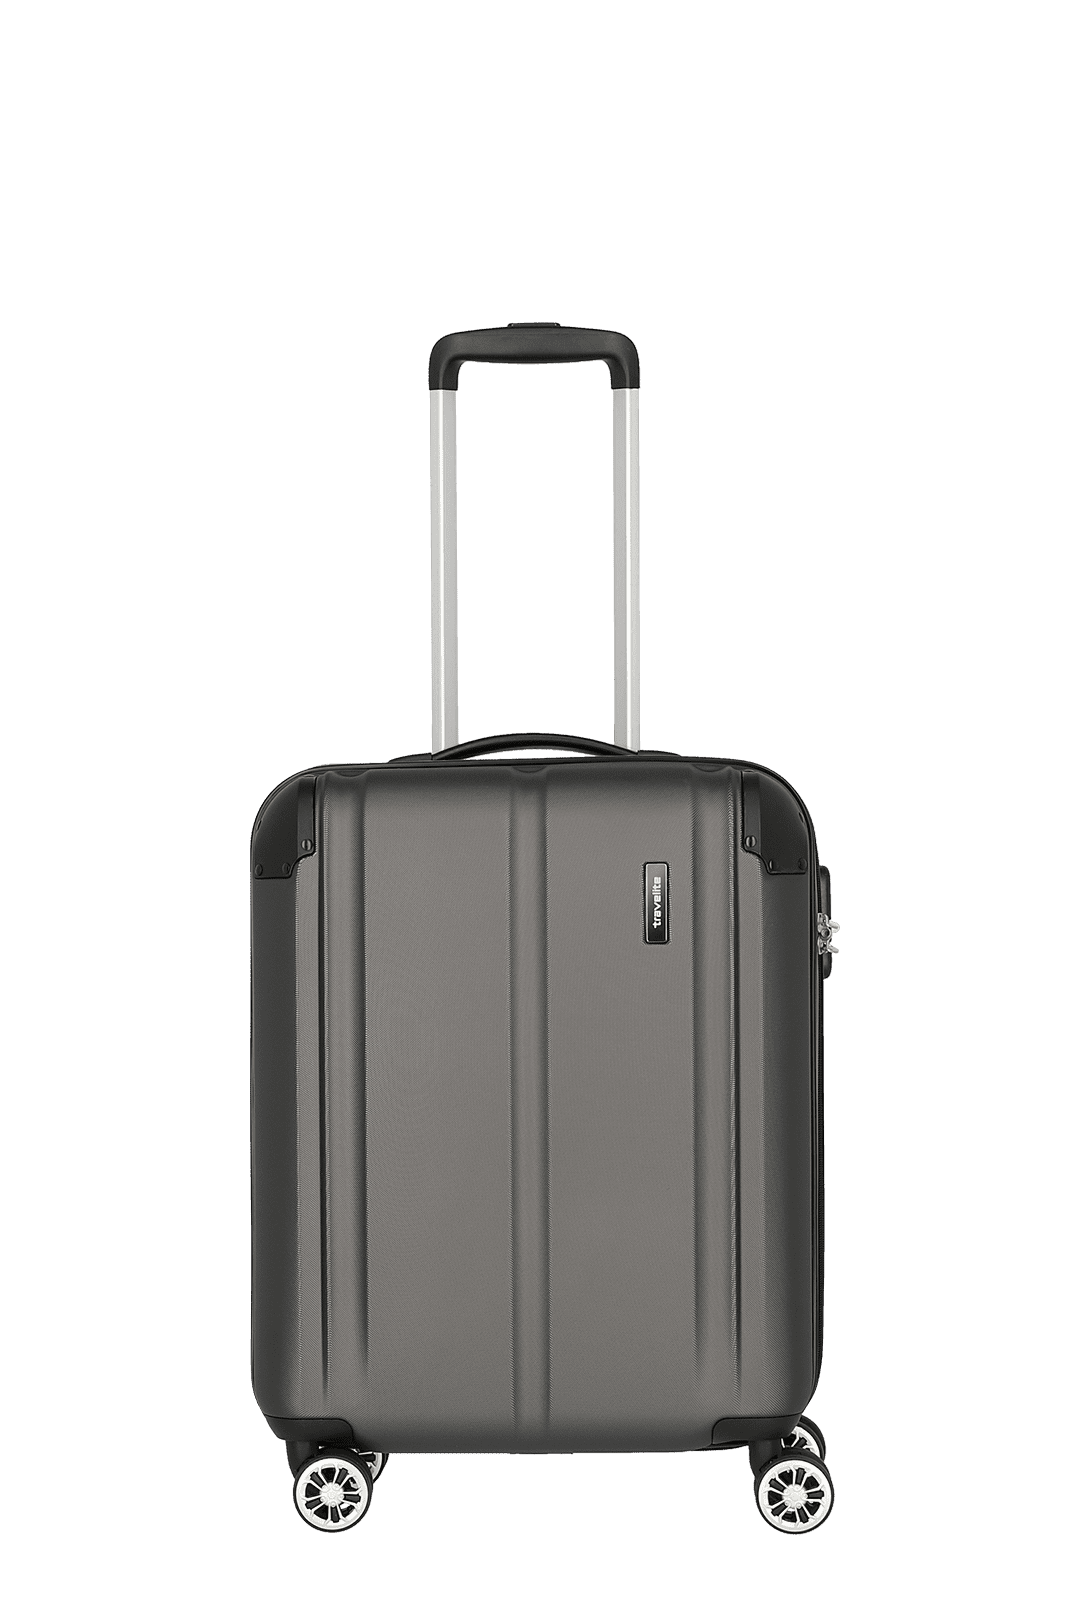 City suitcase hard shell size S (55cm) in color green - travelite